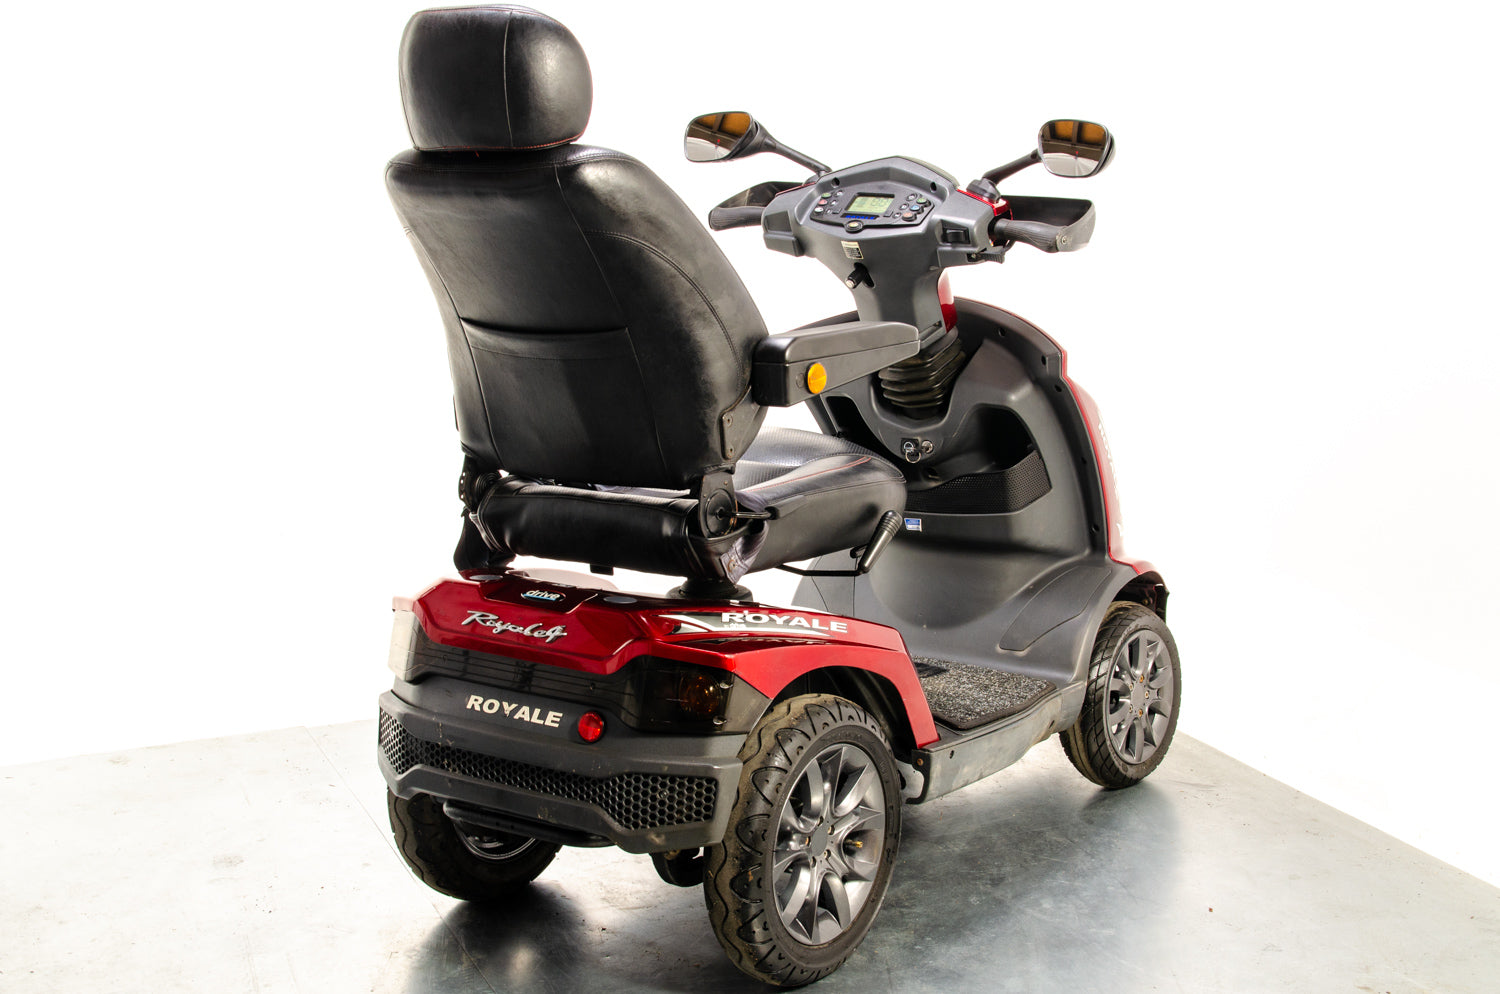 Drive Royale 4 Used Mobility Scooter 8mph Large Comfort Class 3 Road Legal Luxury 13190